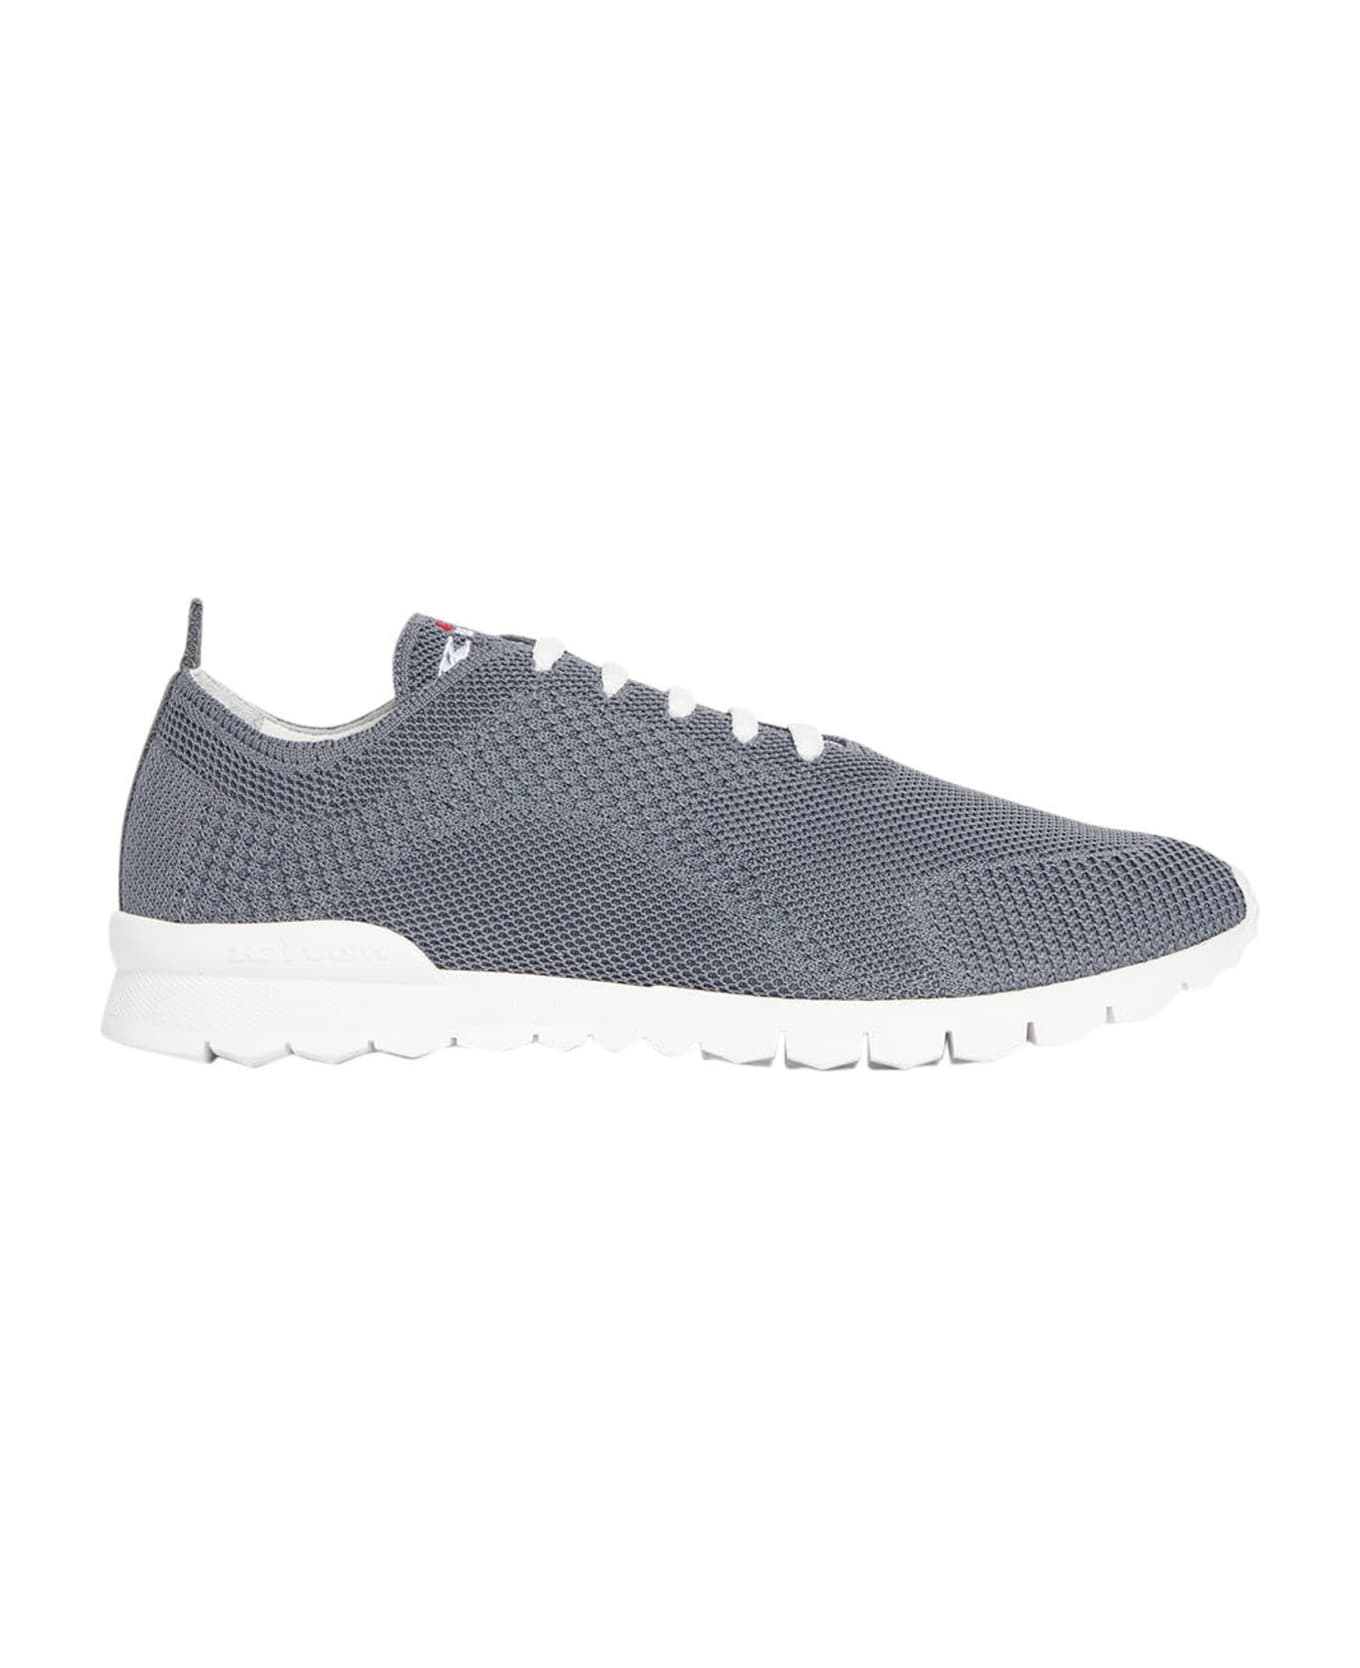 Kiton Fits - Sneakers Shoes Cotton - GREY